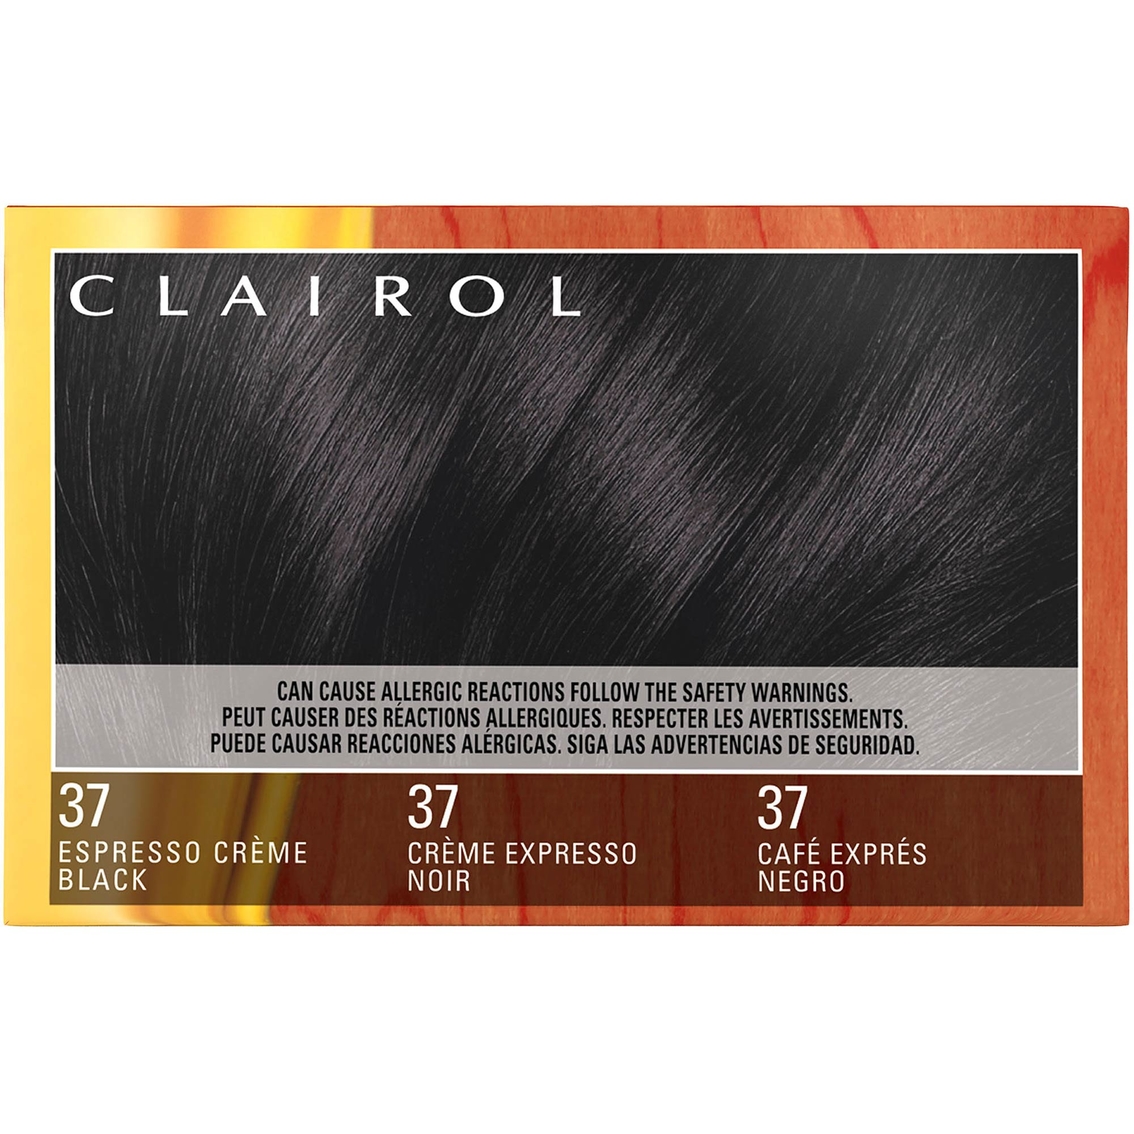 Clairol Natural Instincts Hair Color - Image 4 of 4